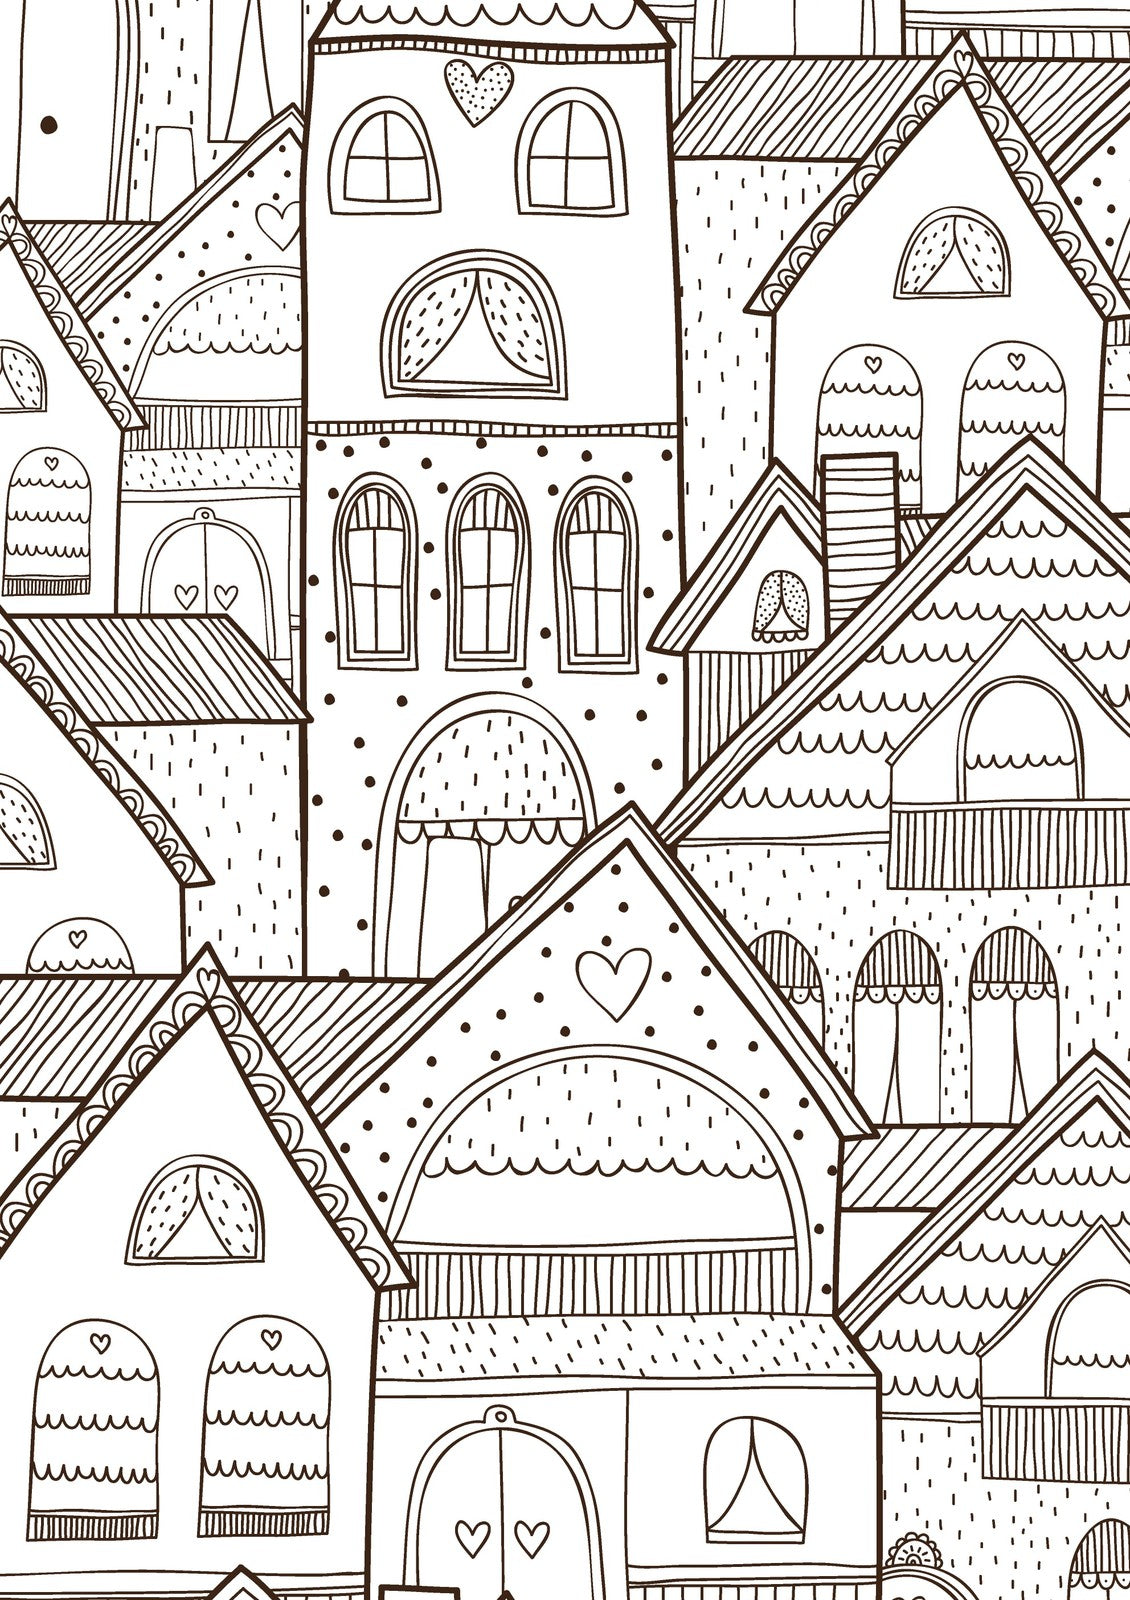 Urban Mess - Anti Stress Detailed Houses & Buildings, Seamless Architecture Patterns PDF Coloring Book